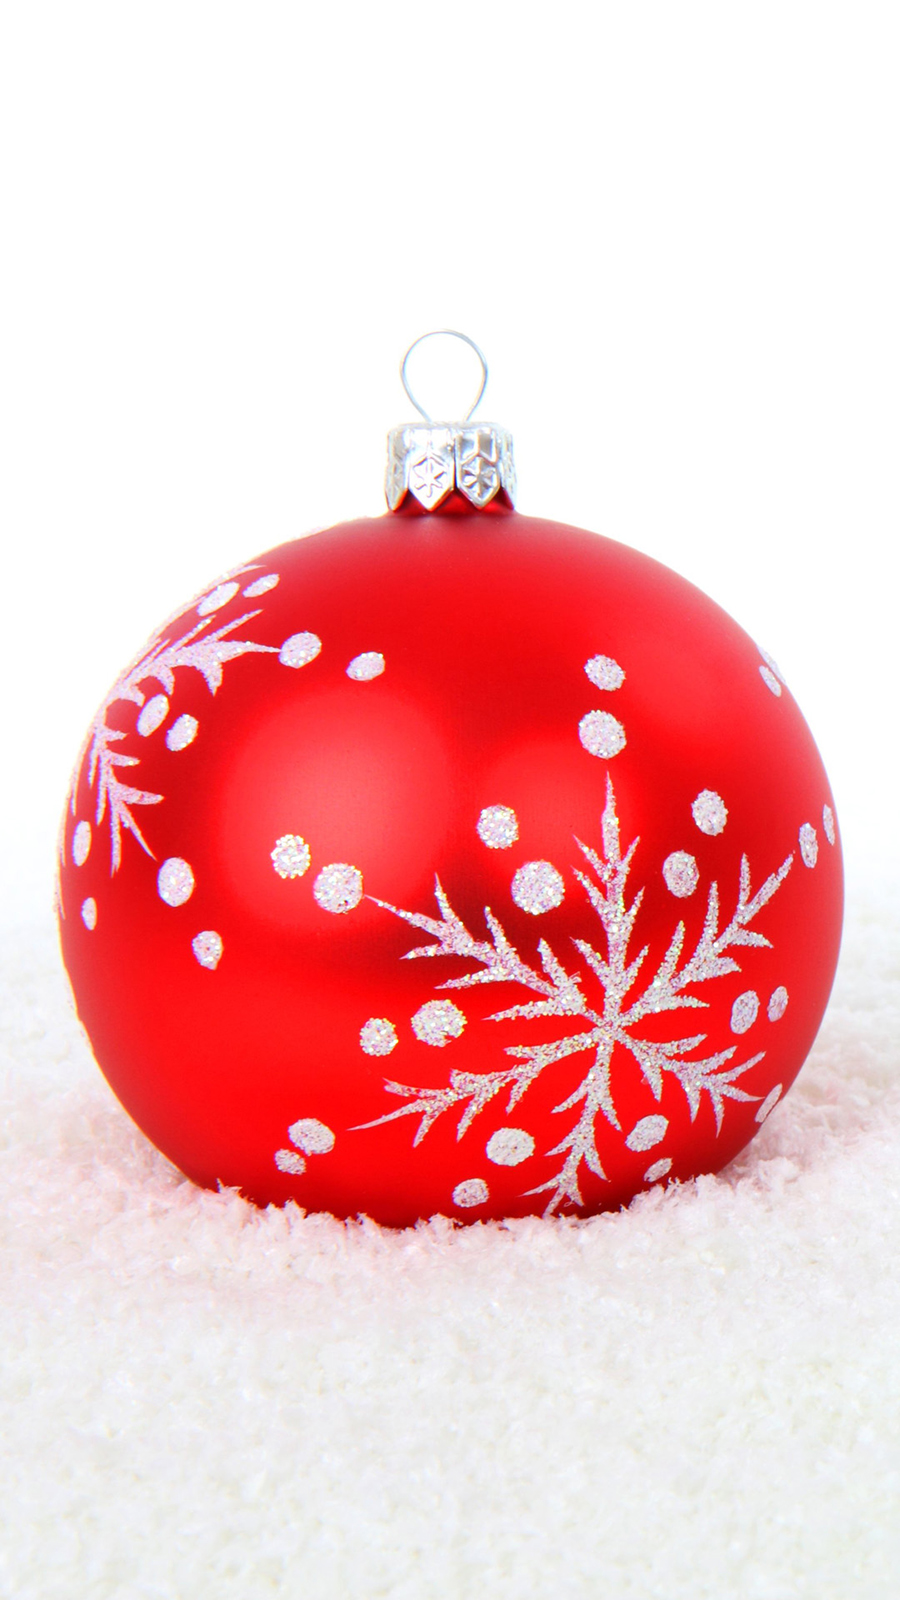 Red Christmas Decoration Ball In Snow Android Wallpaper